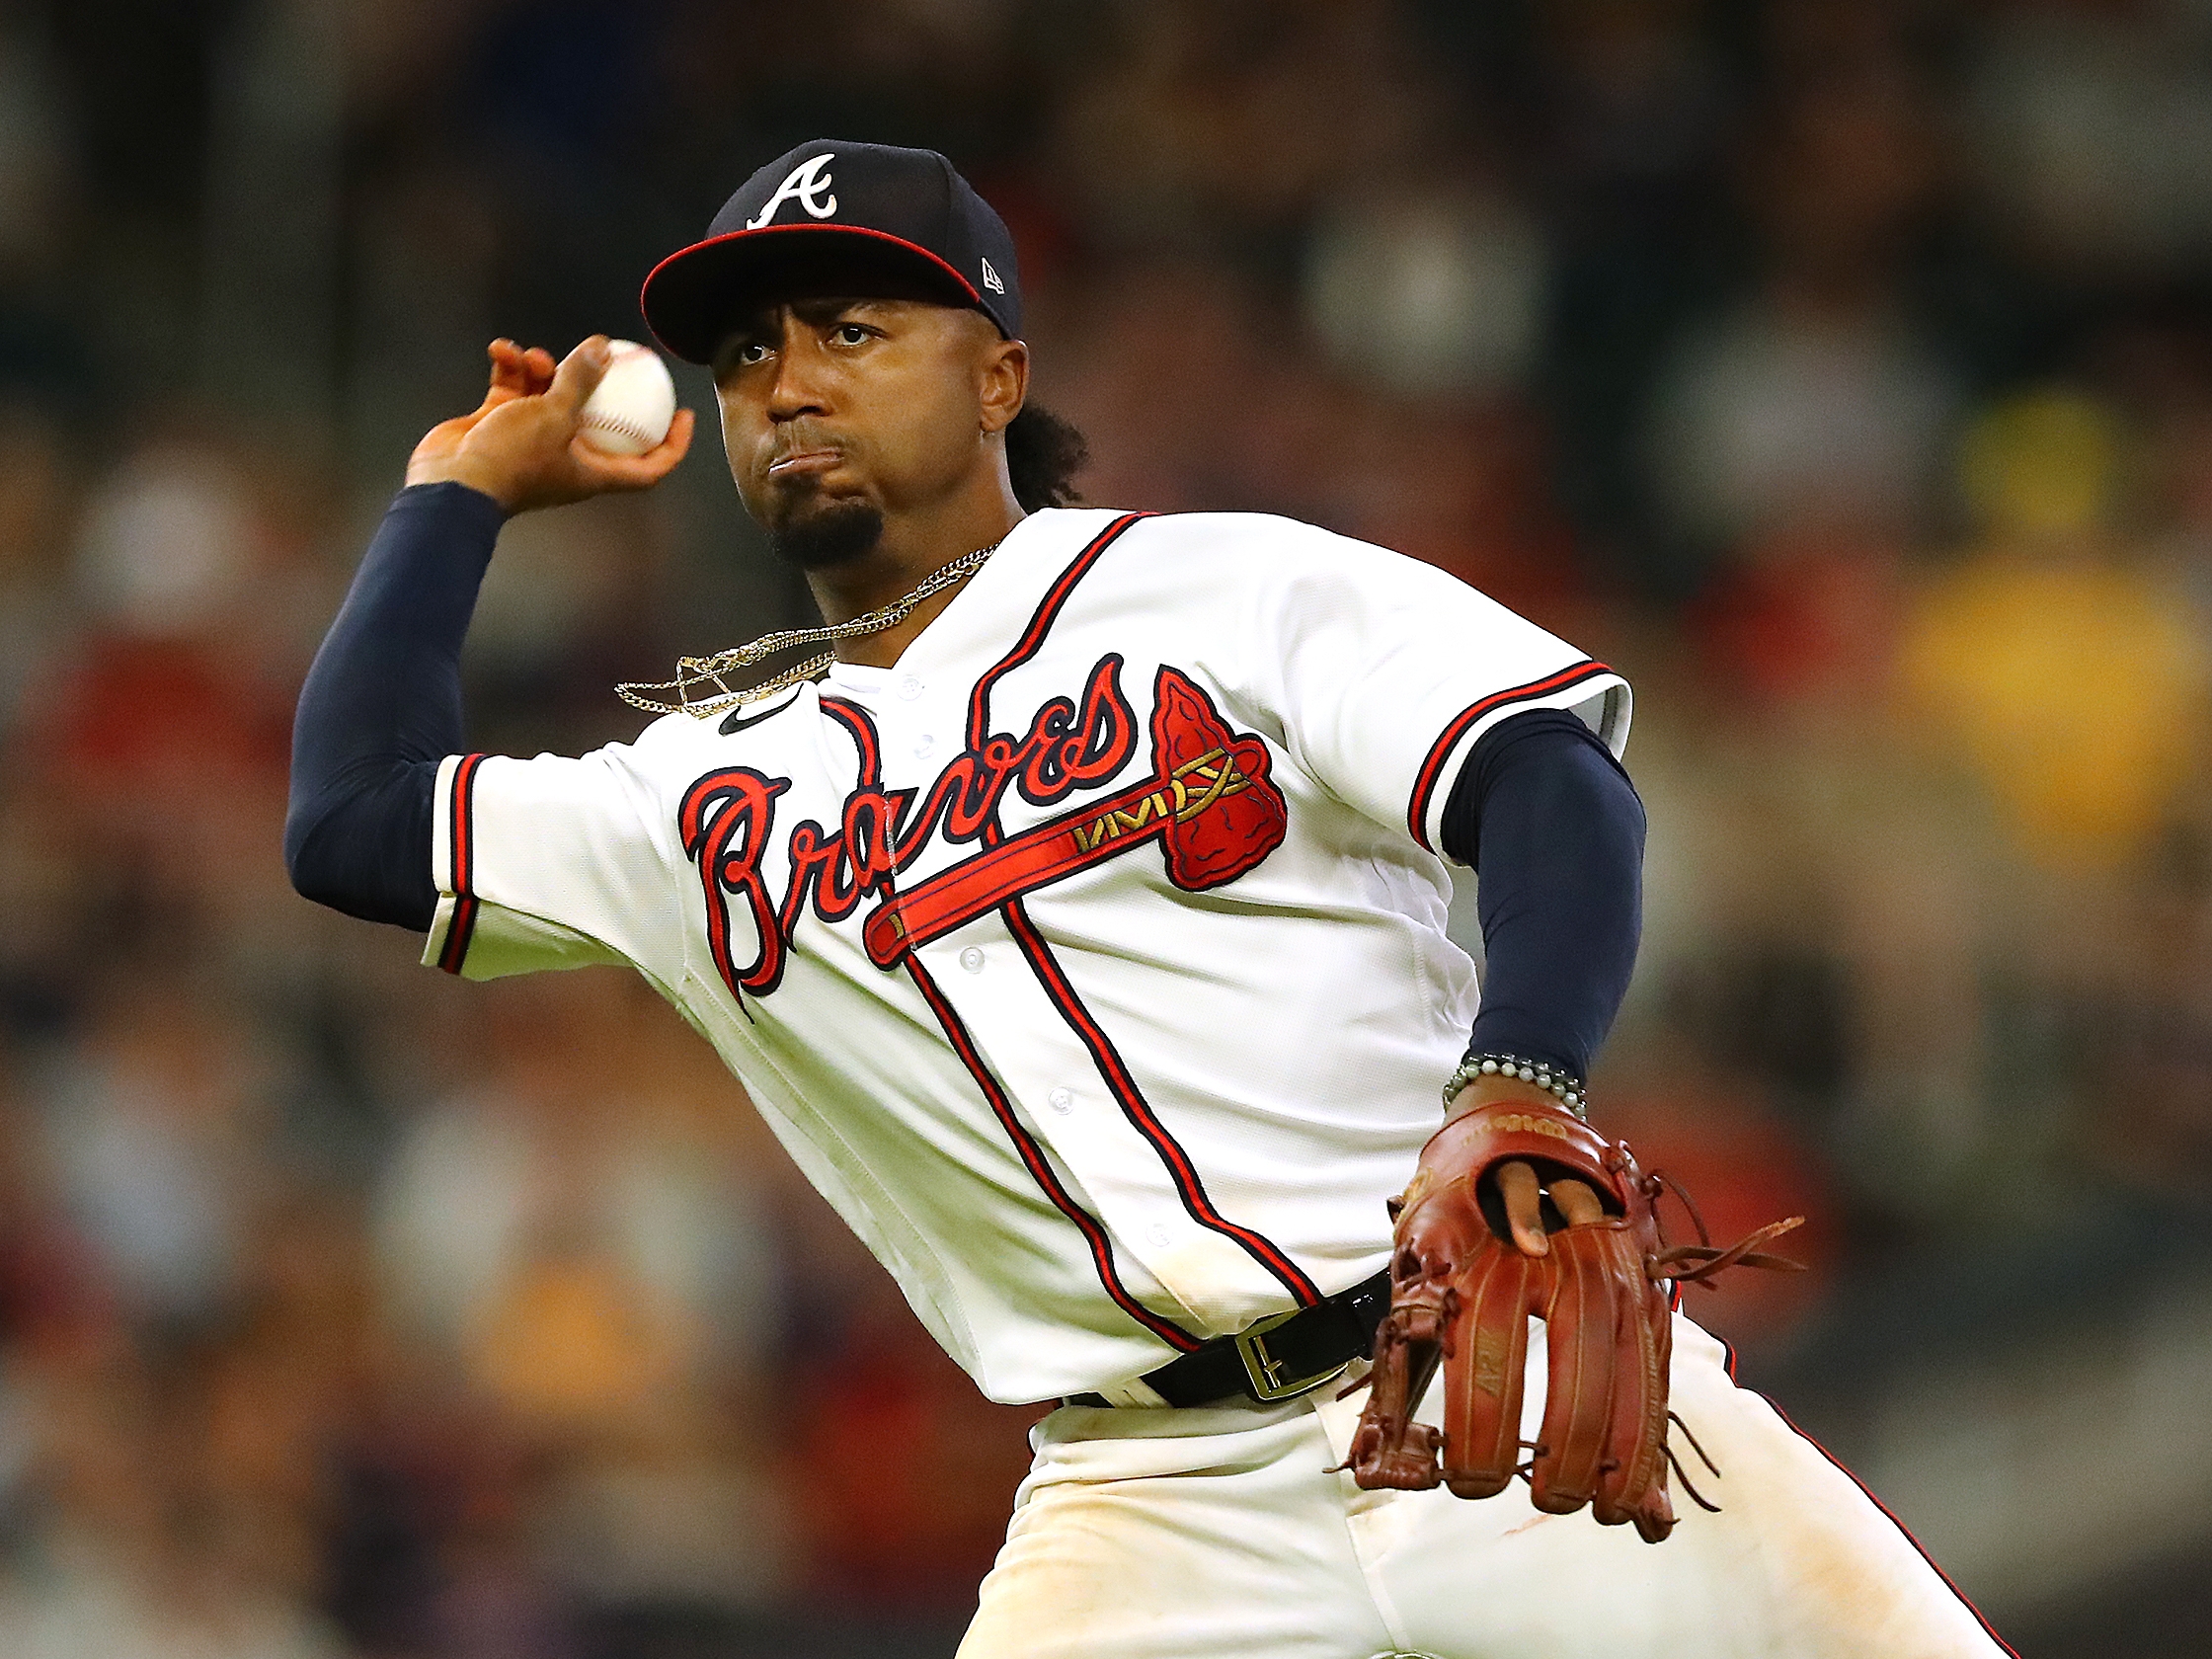 Albies breaks foot, but Braves beat Nats for 12th straight – KGET 17